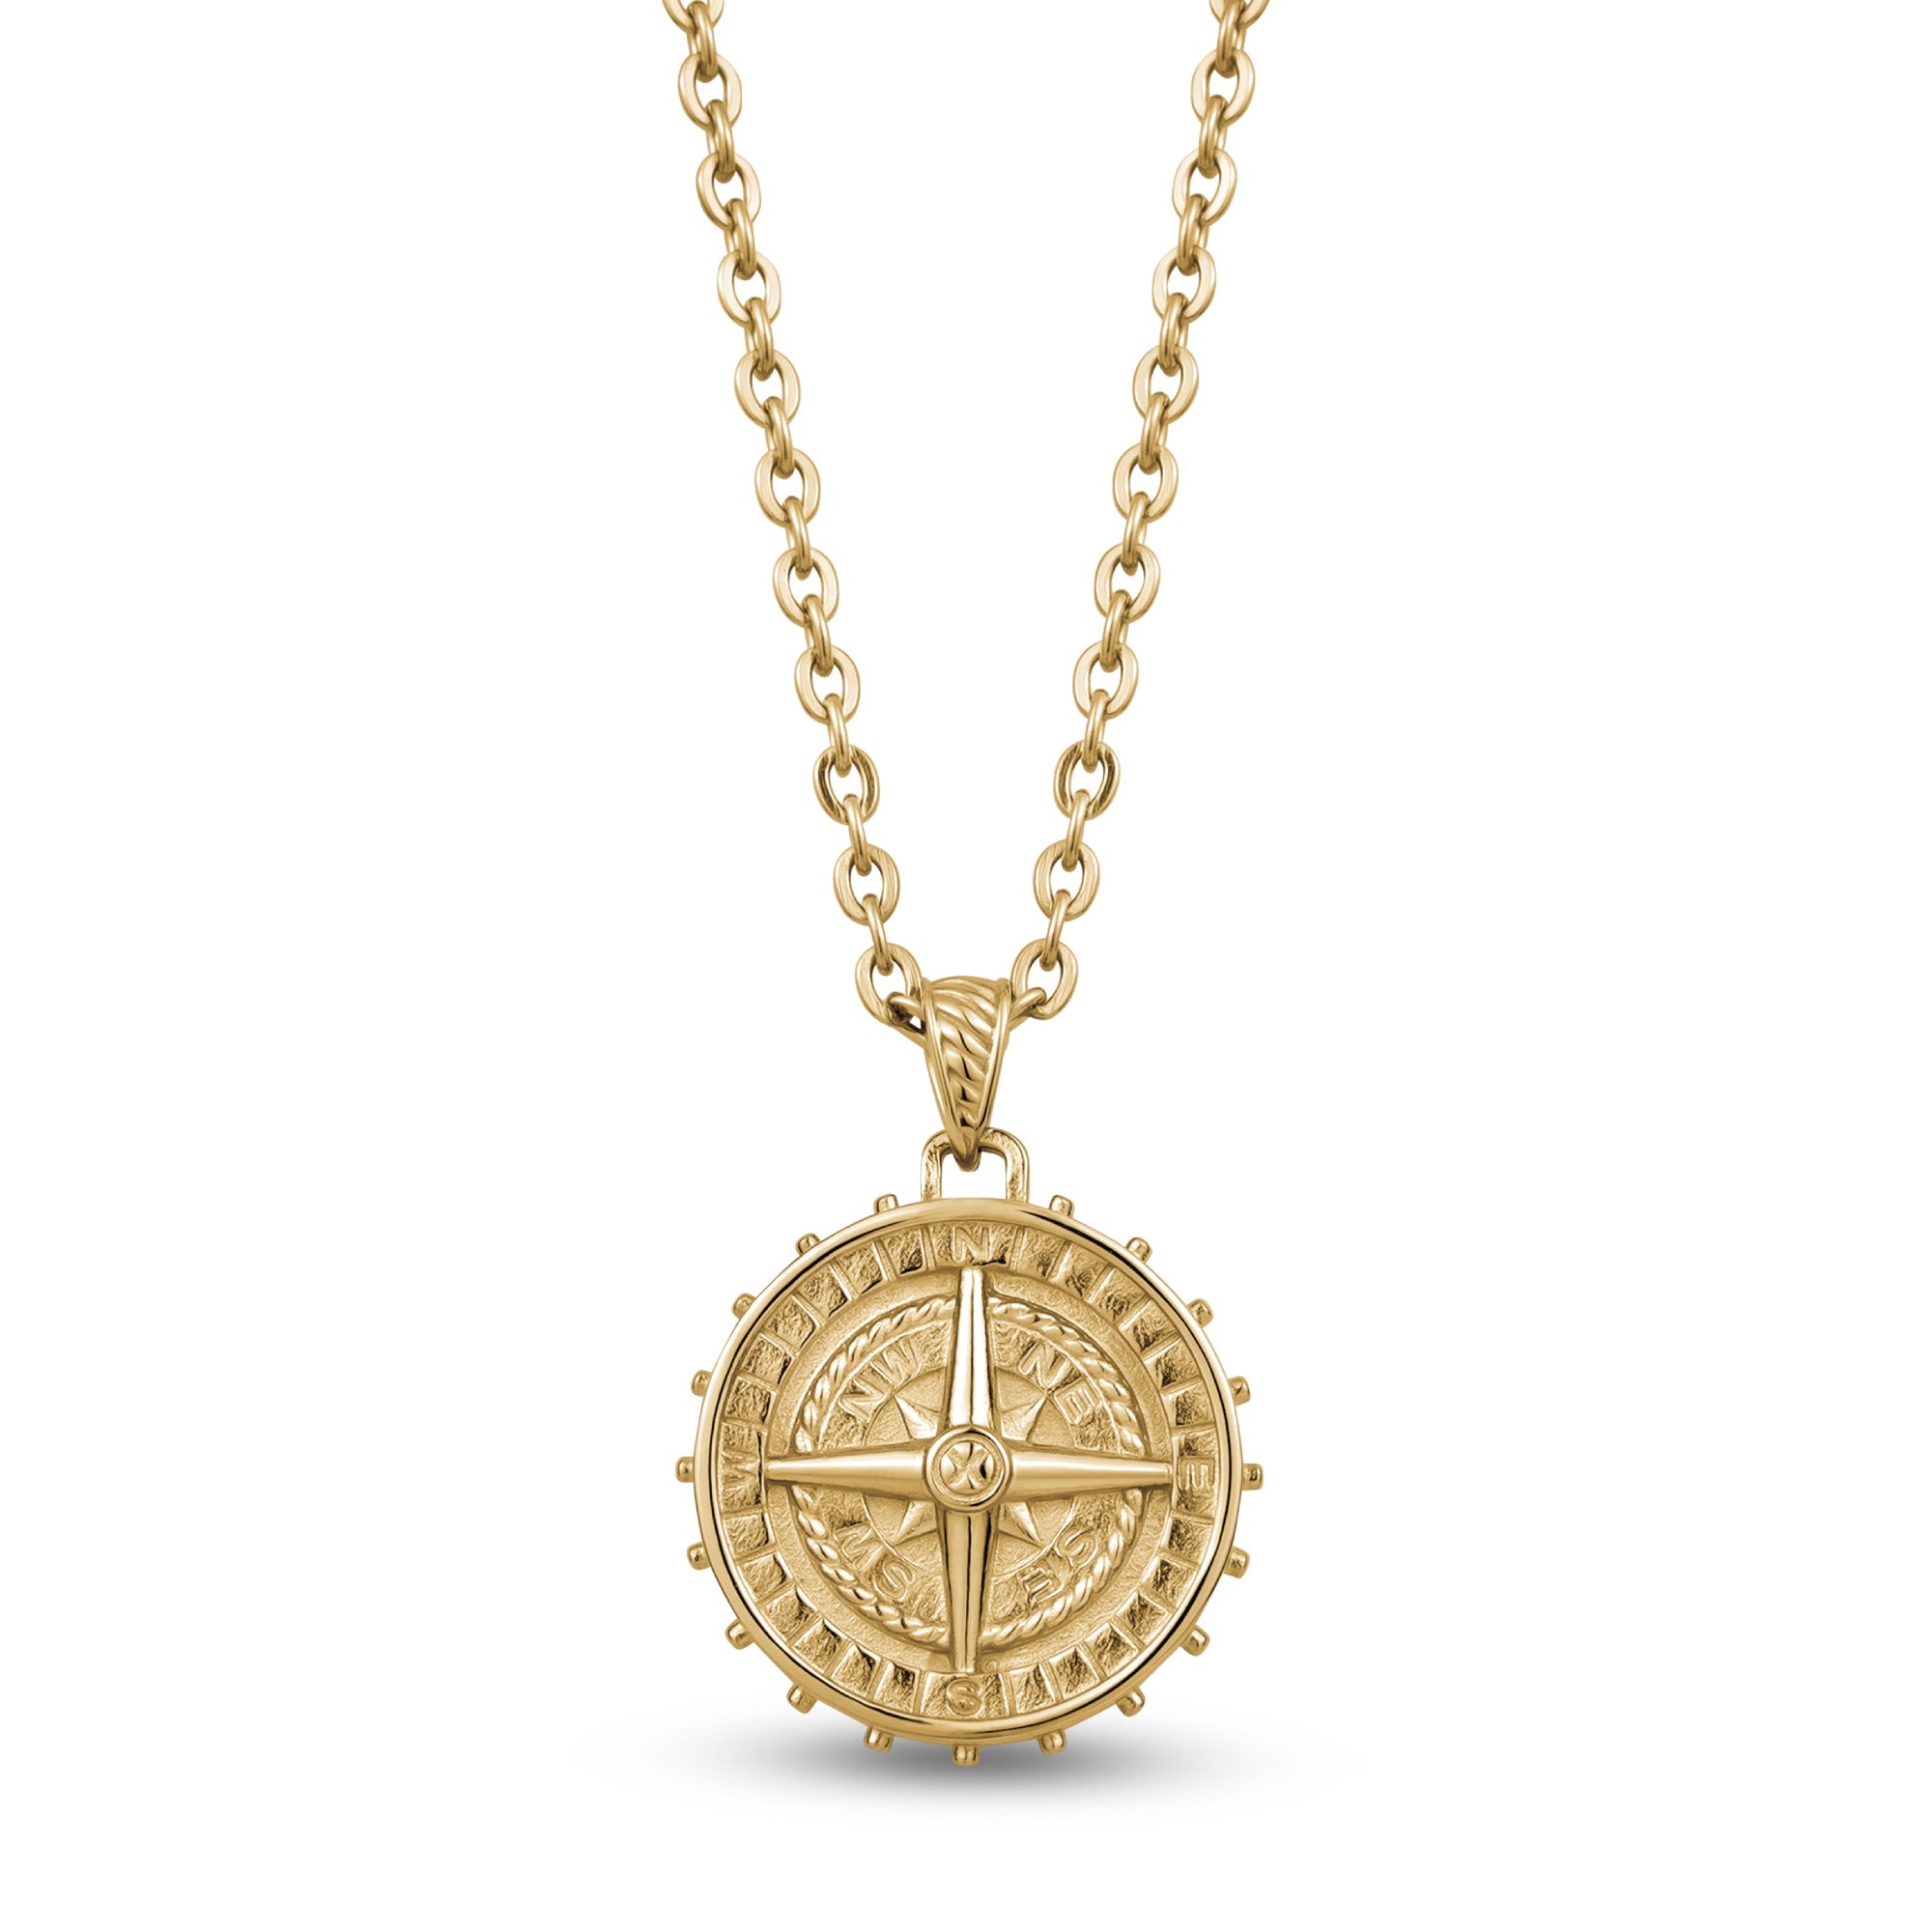 18K Gold Compass Necklace for Women Compass Pendant Gold - Etsy | Compass  necklace, Gold compass necklace, Round gold pendant necklace